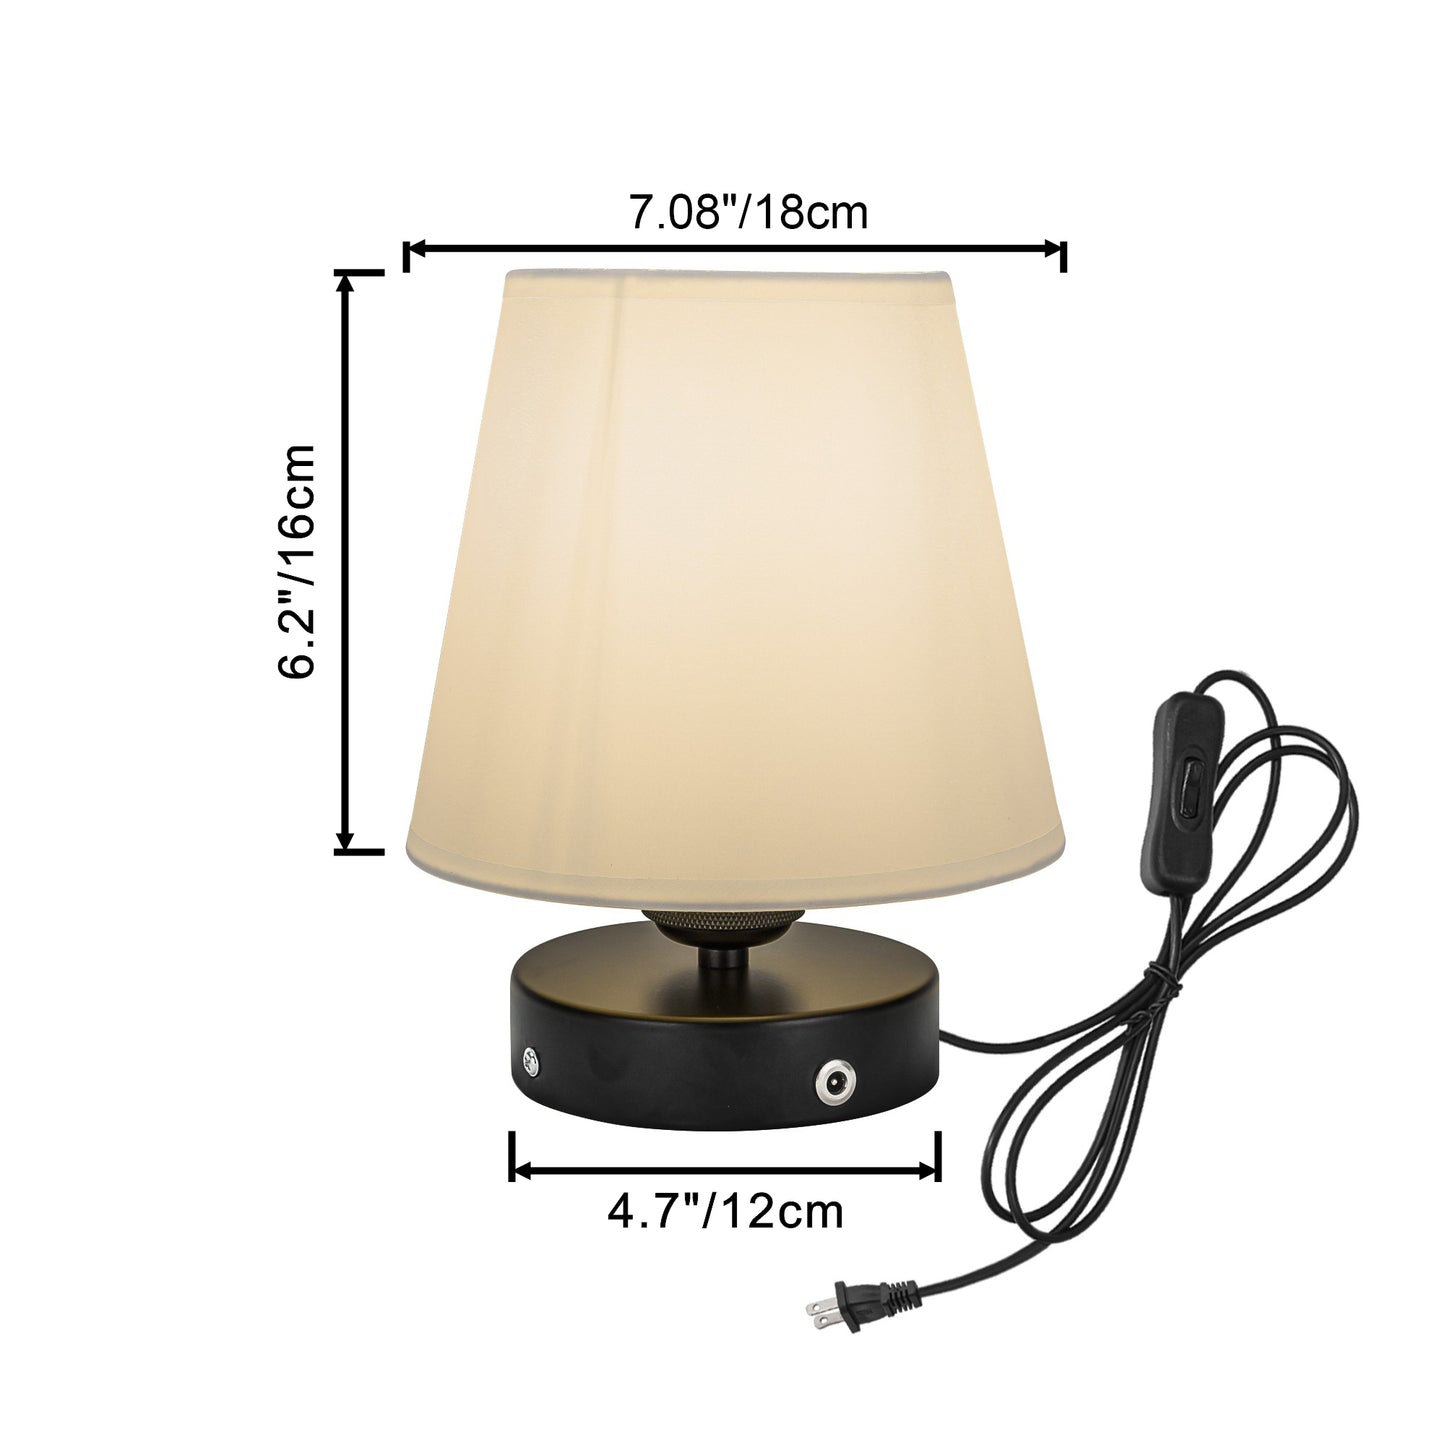 FSLiving Table Lamp Dimmable with Dimmer Switch Retro Brown Cord Steam Antique Table Light Desk Lamp Desk Light Bulb Sold Separately (Iron Style)